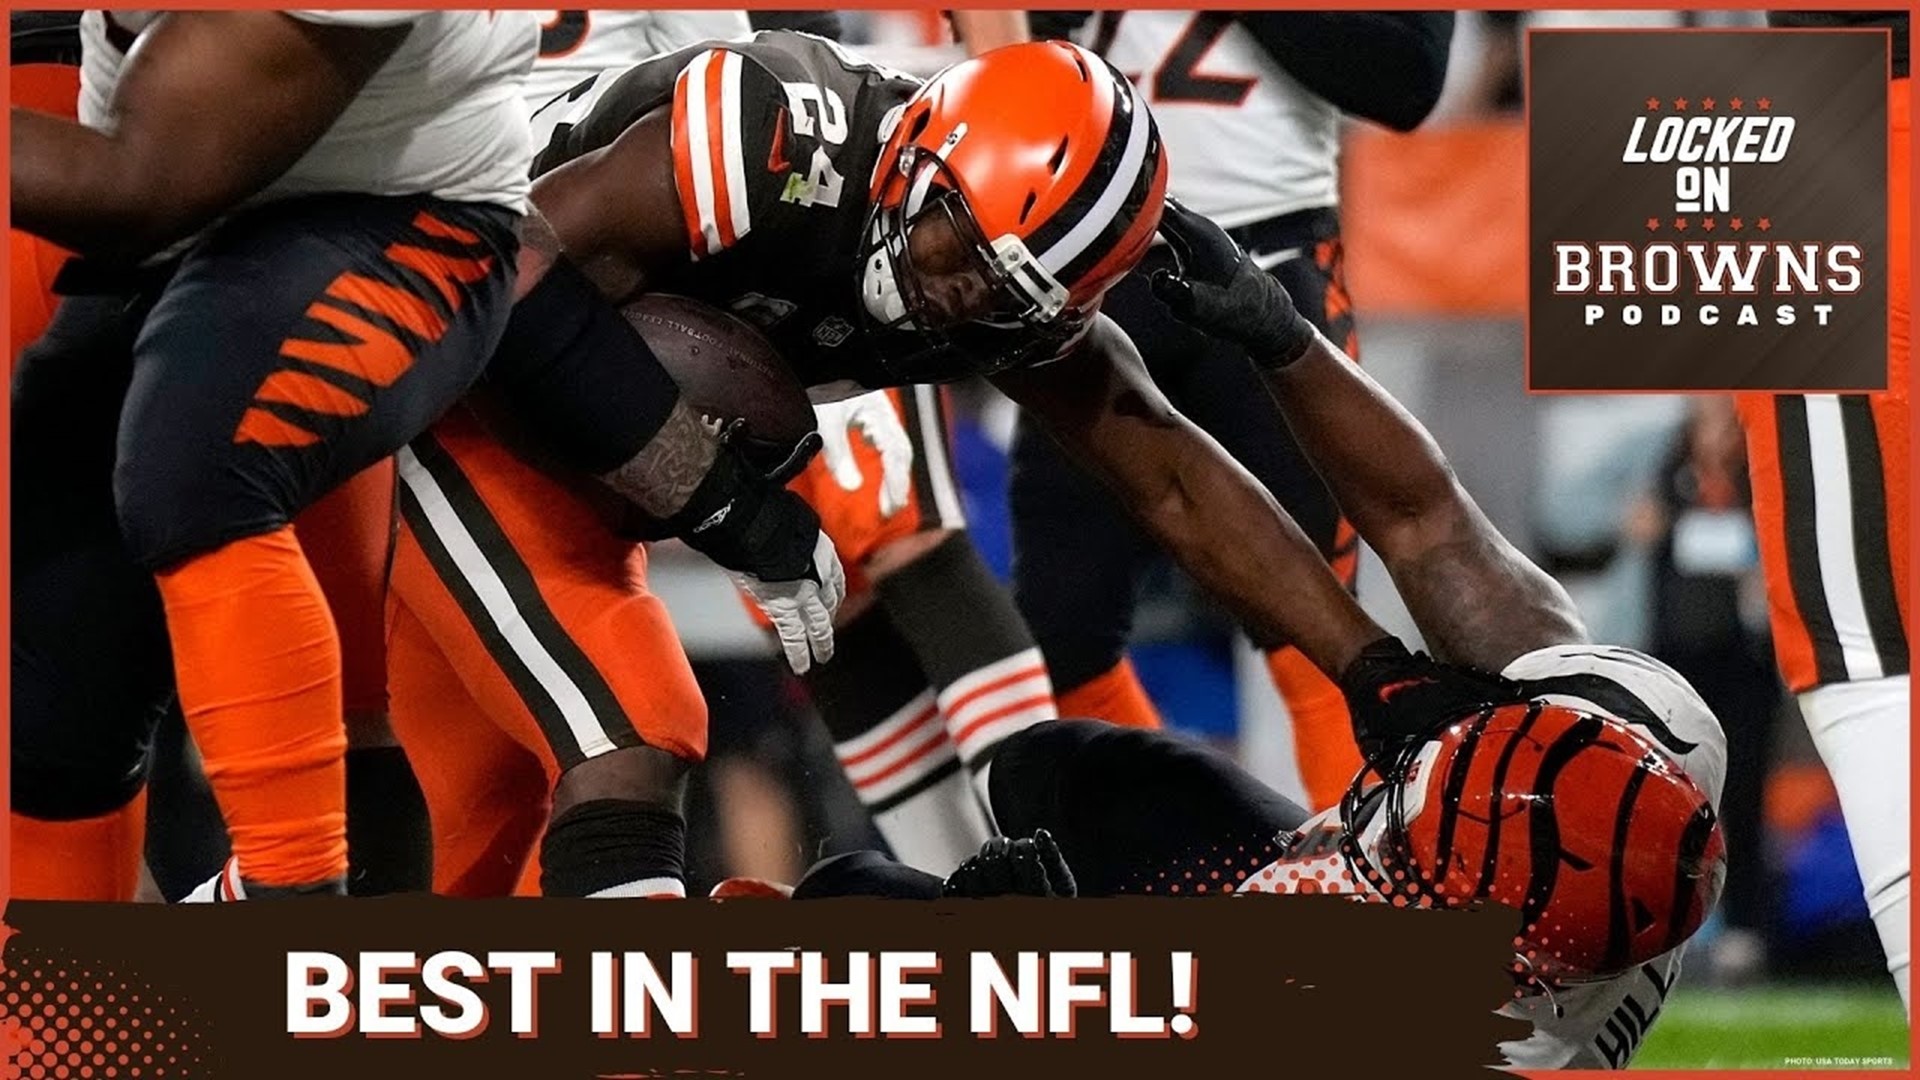 PFF's Trevor Sikkema joins the show to talk his preseason positional rankings. Trevor's rankings have Nick Chubb as the top running back in the NFL.